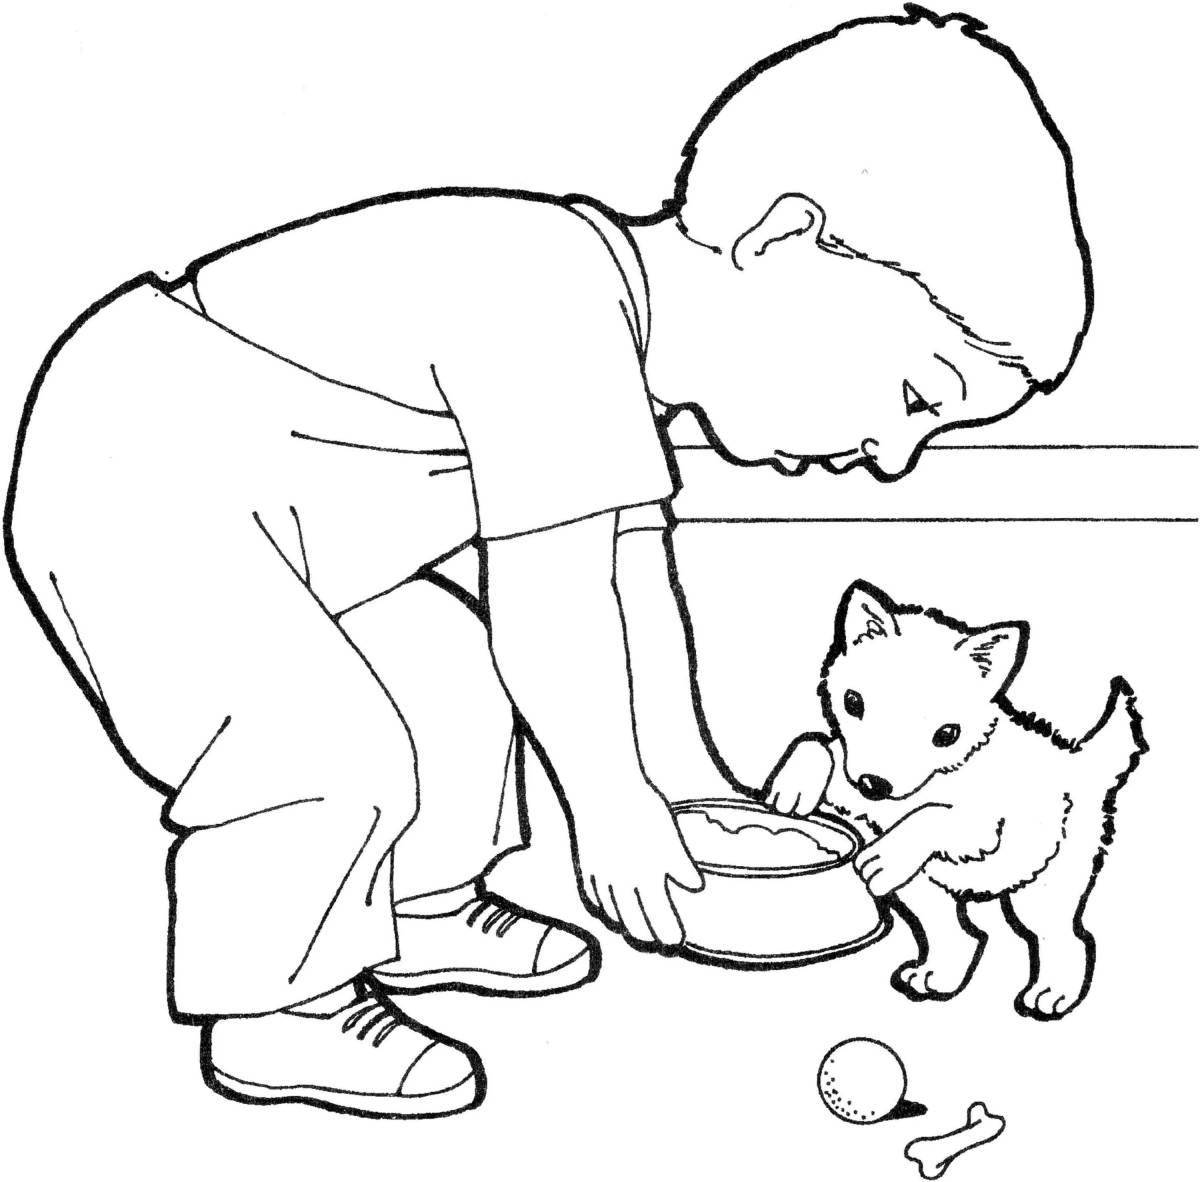 Shine care coloring page